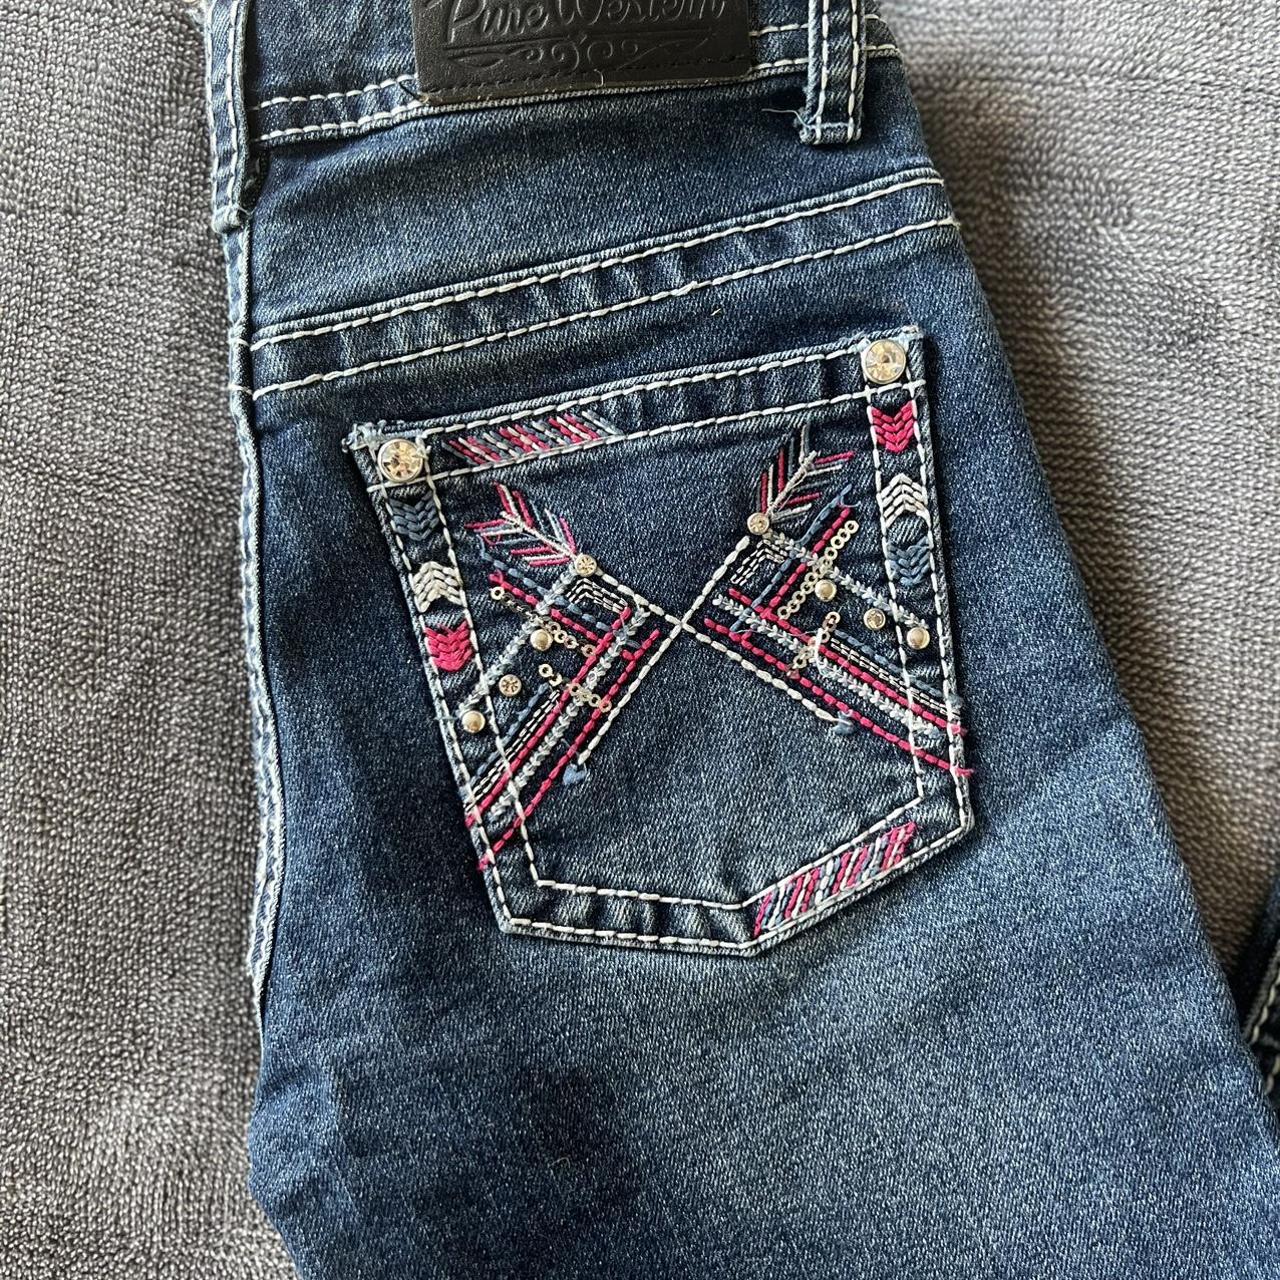 Almost new pure western kids jeans size 8. Perfect... - Depop